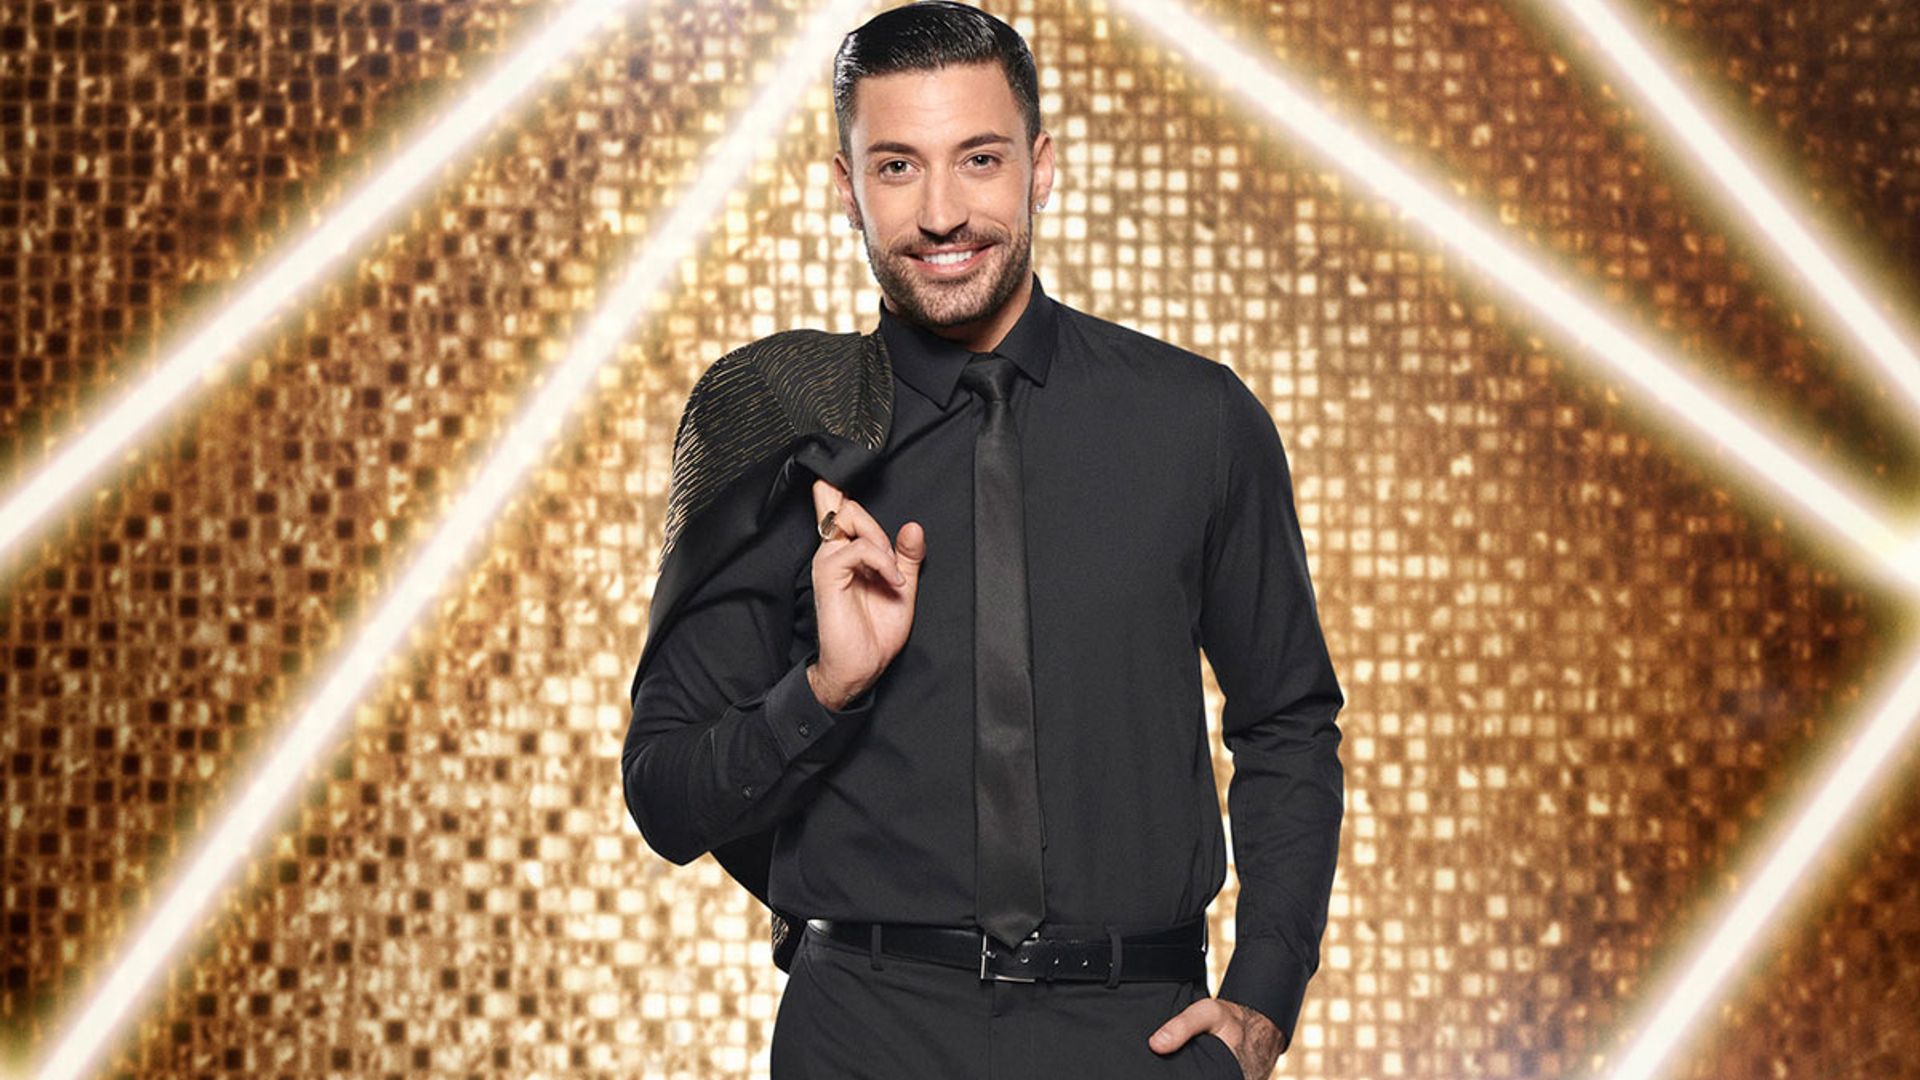 Has Strictly star Giovanni Pernice ever won the show?